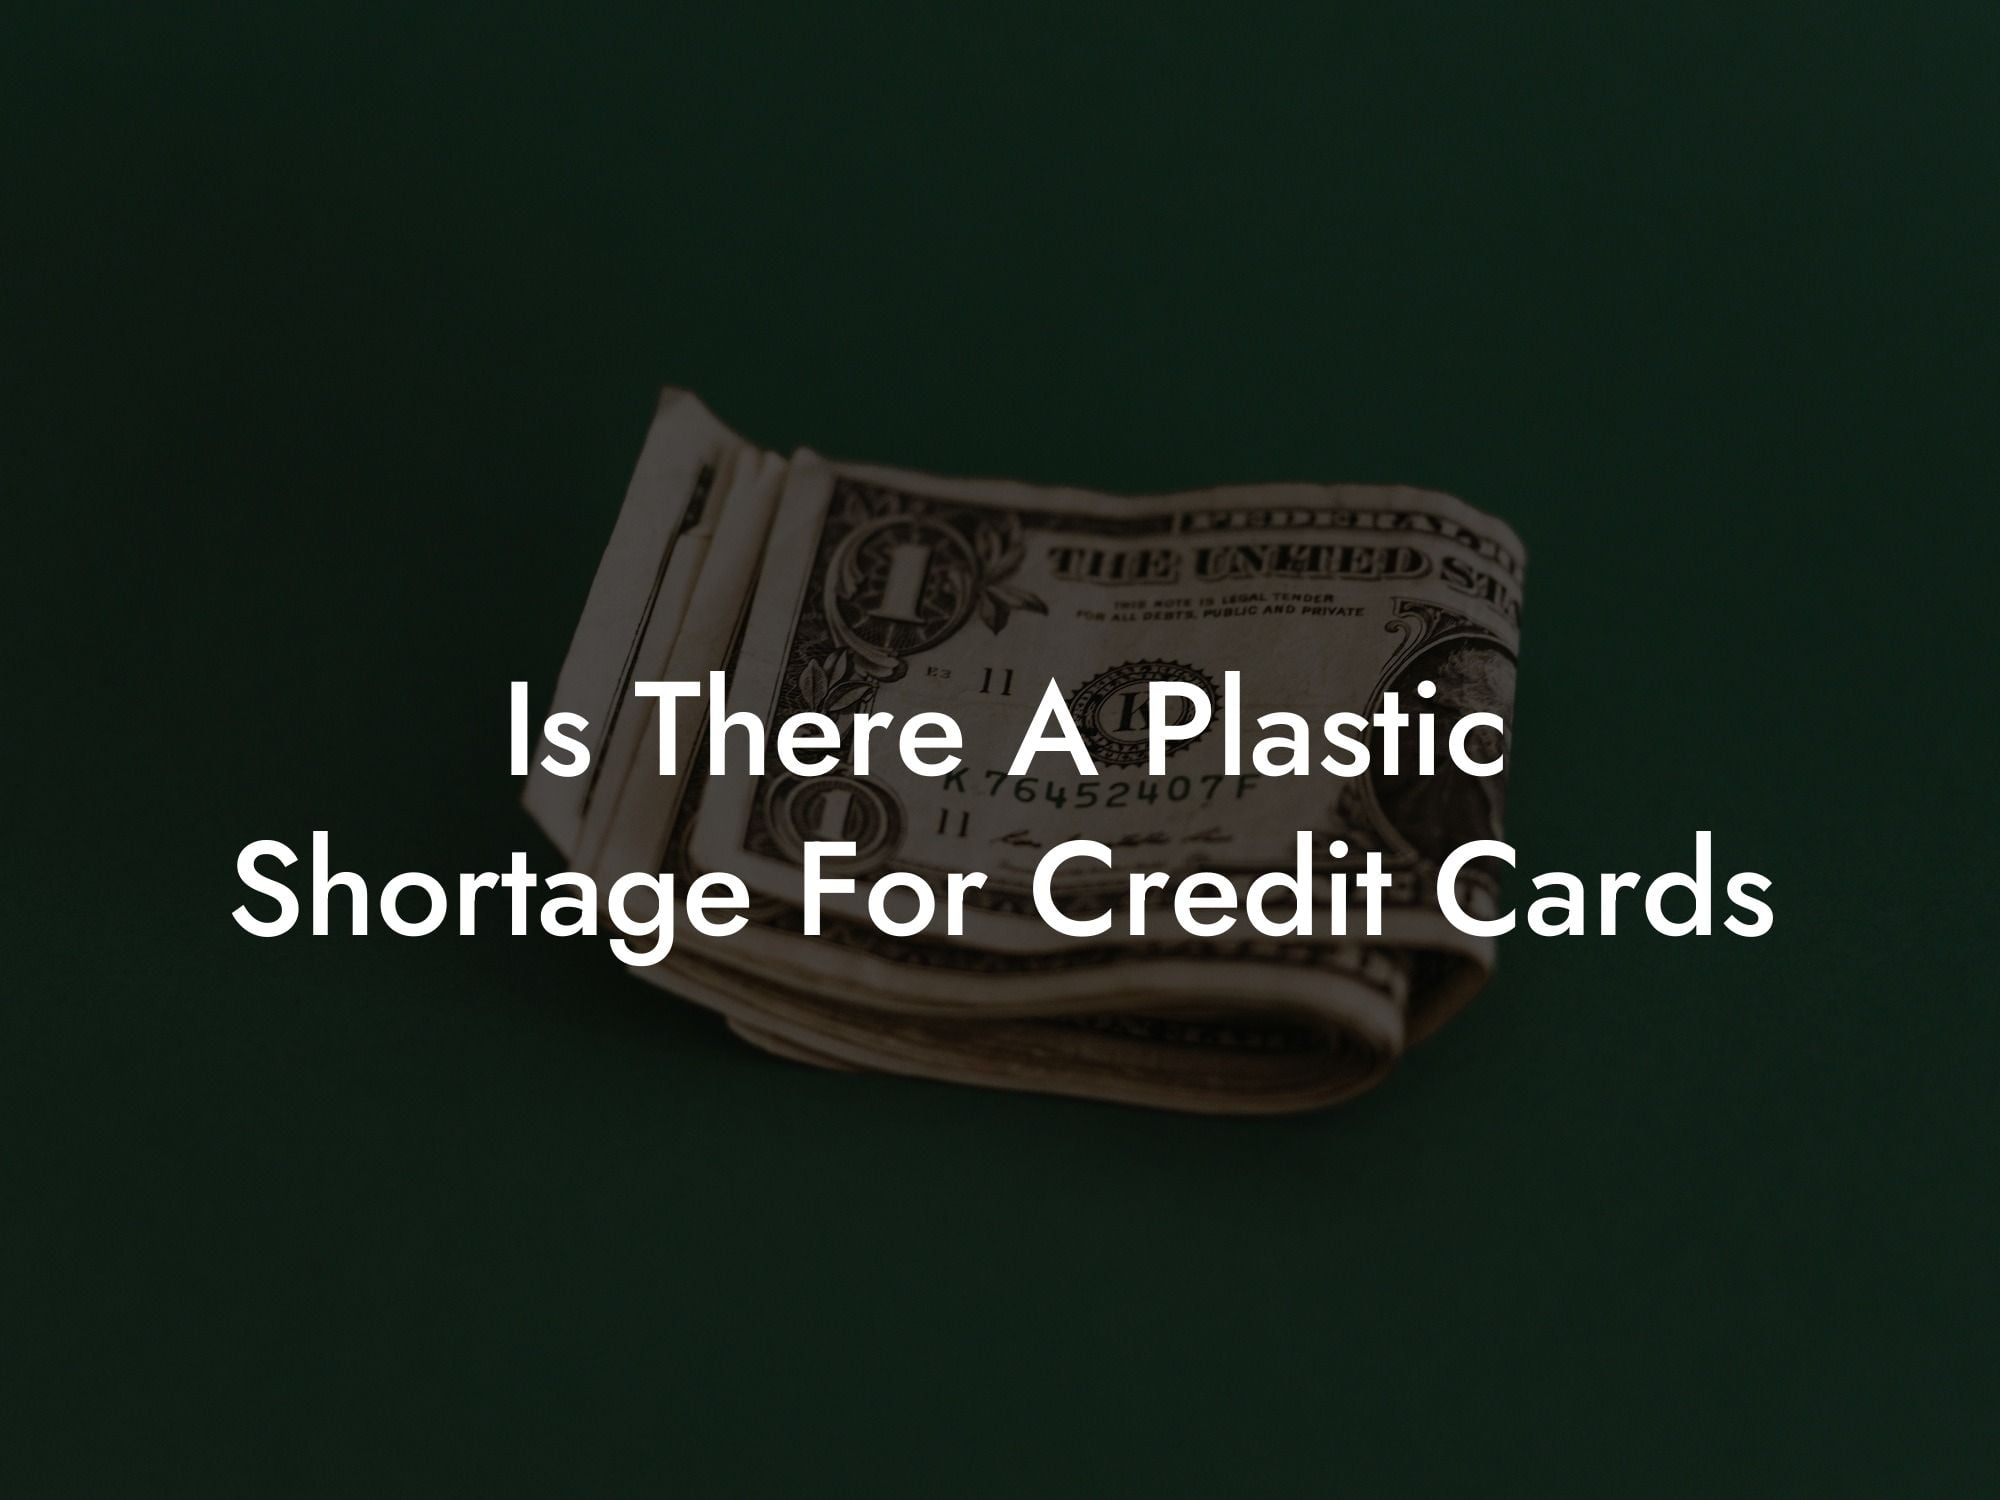 Is There A Plastic Shortage For Credit Cards